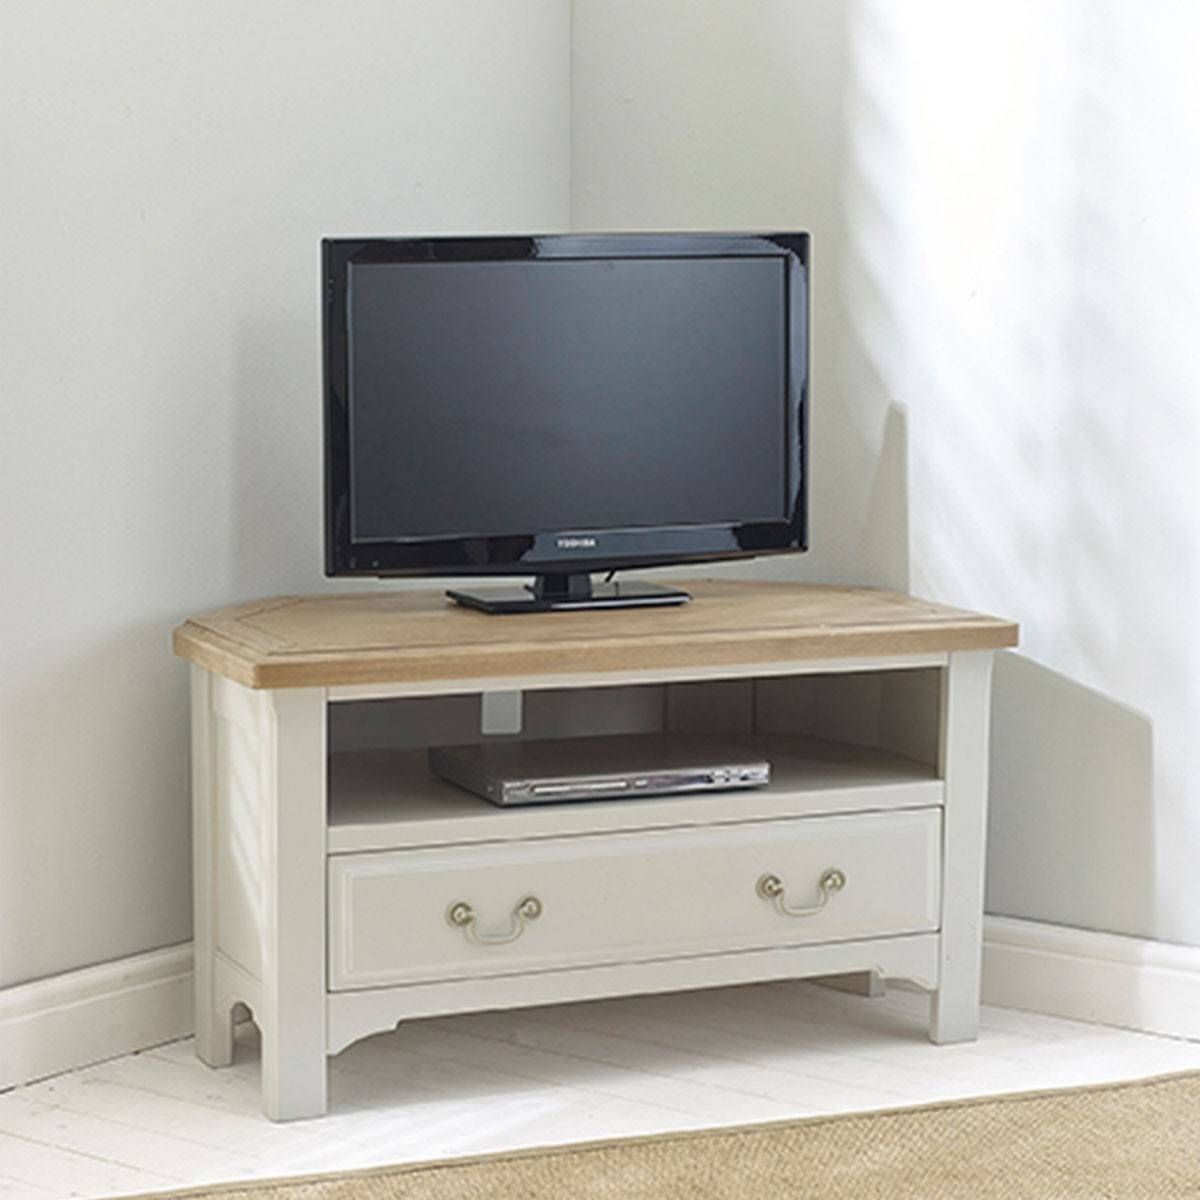 Hutch® – Buxton Light Grey Painted Corner Tv Unit Intended For Painted Corner Tv Cabinets (View 10 of 15)